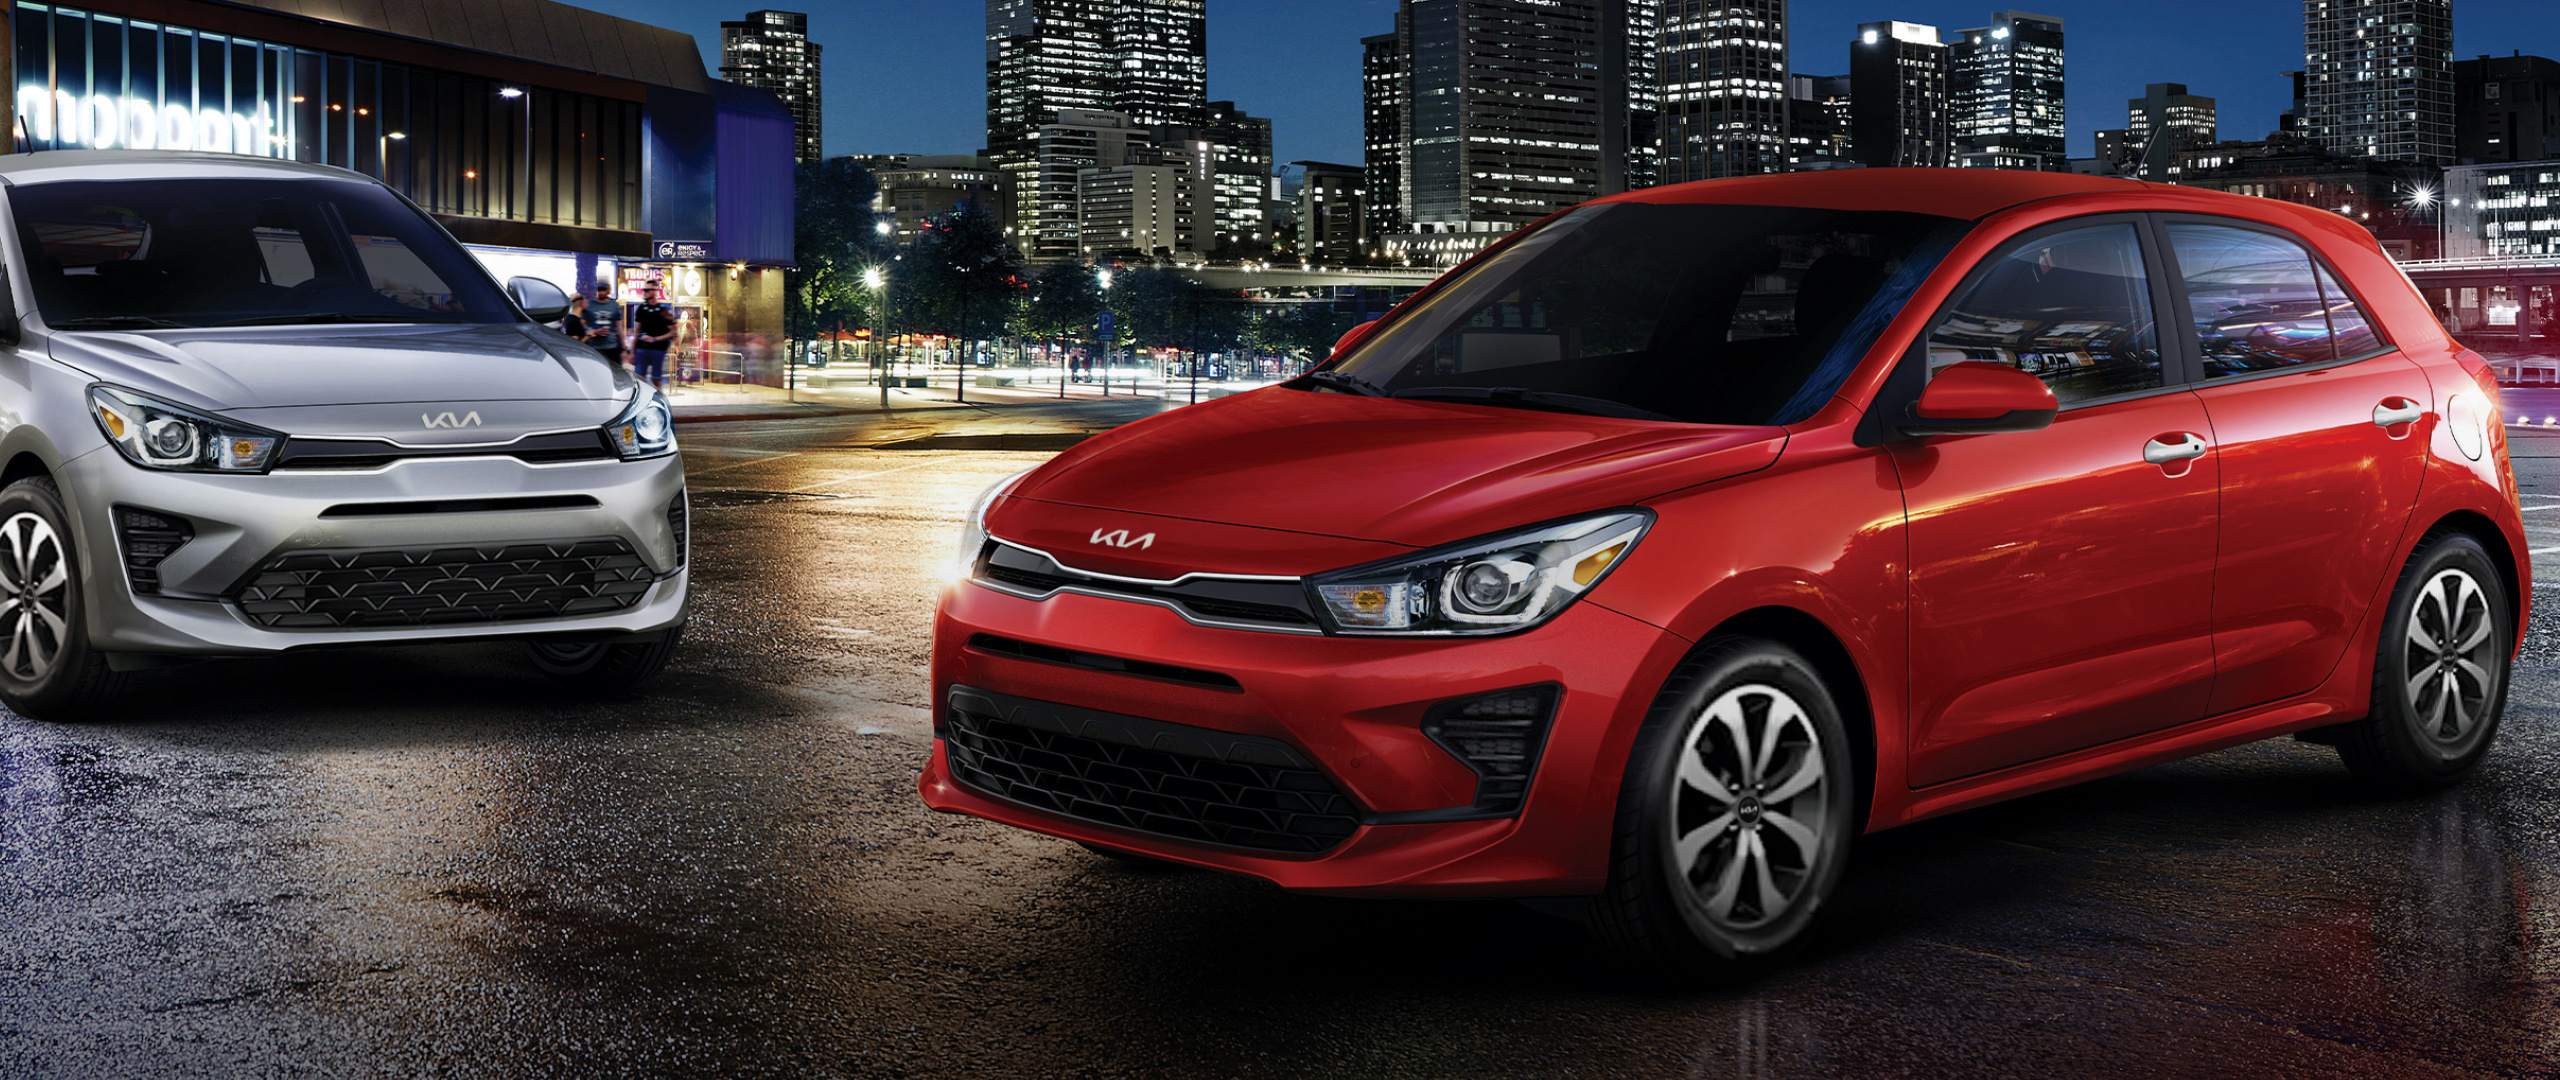 2022 Kia Rio 5-Door Red And Silver Vehicles Parked In Front Of A City At Night